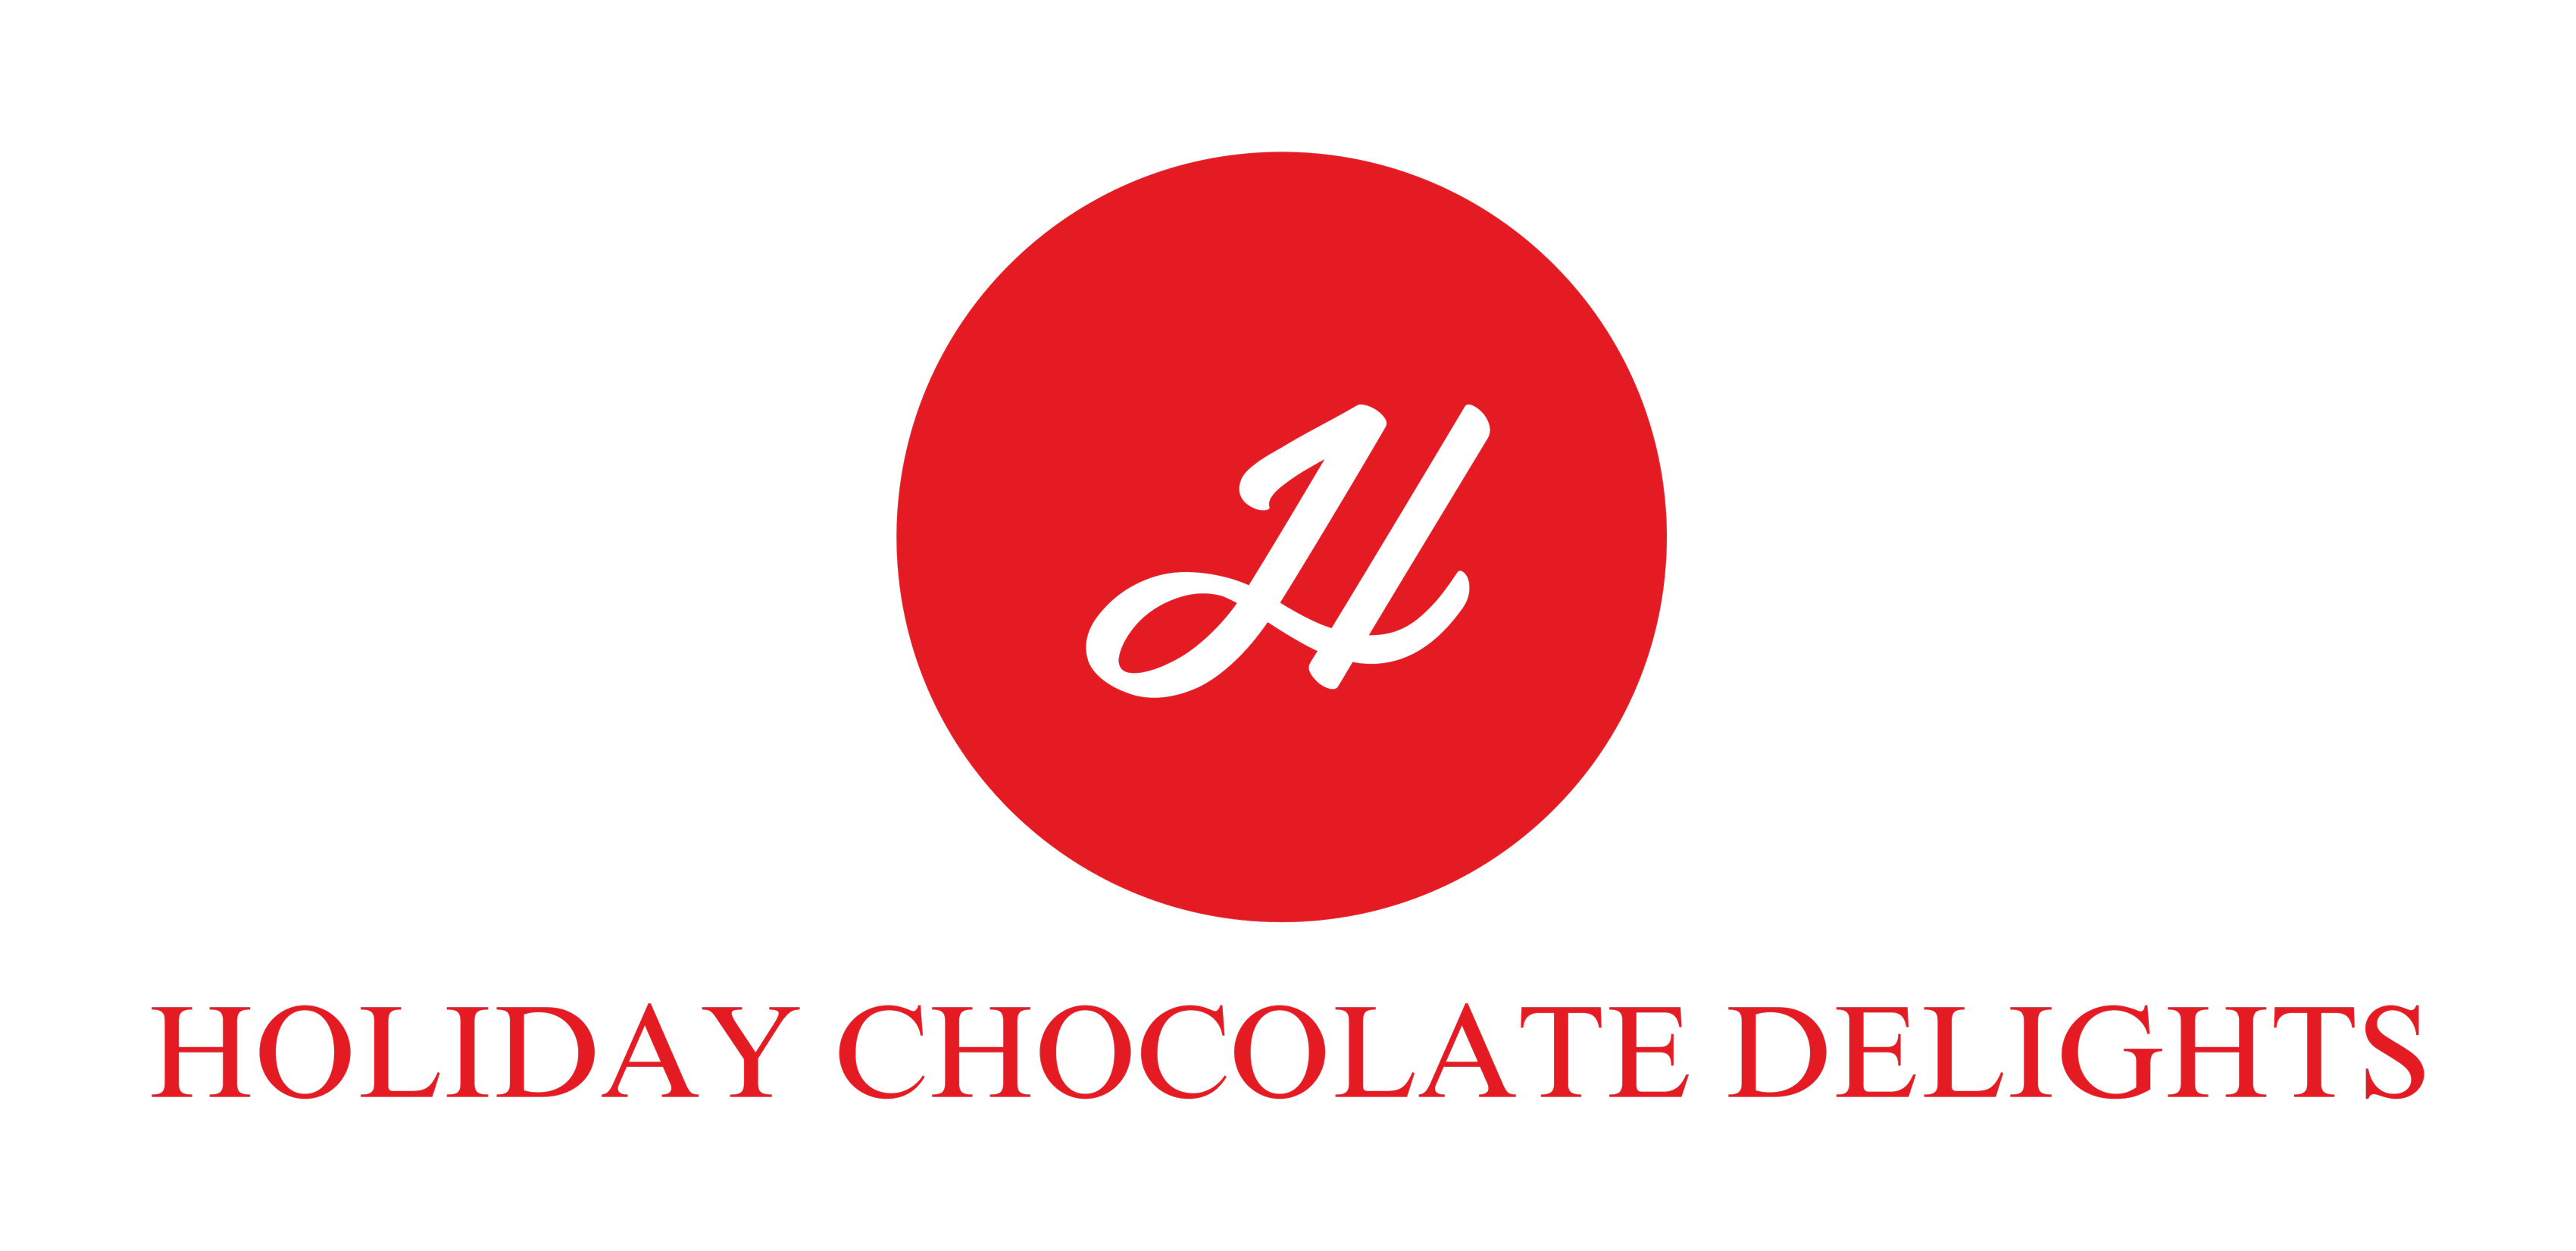 Holiday Chocolate Delights